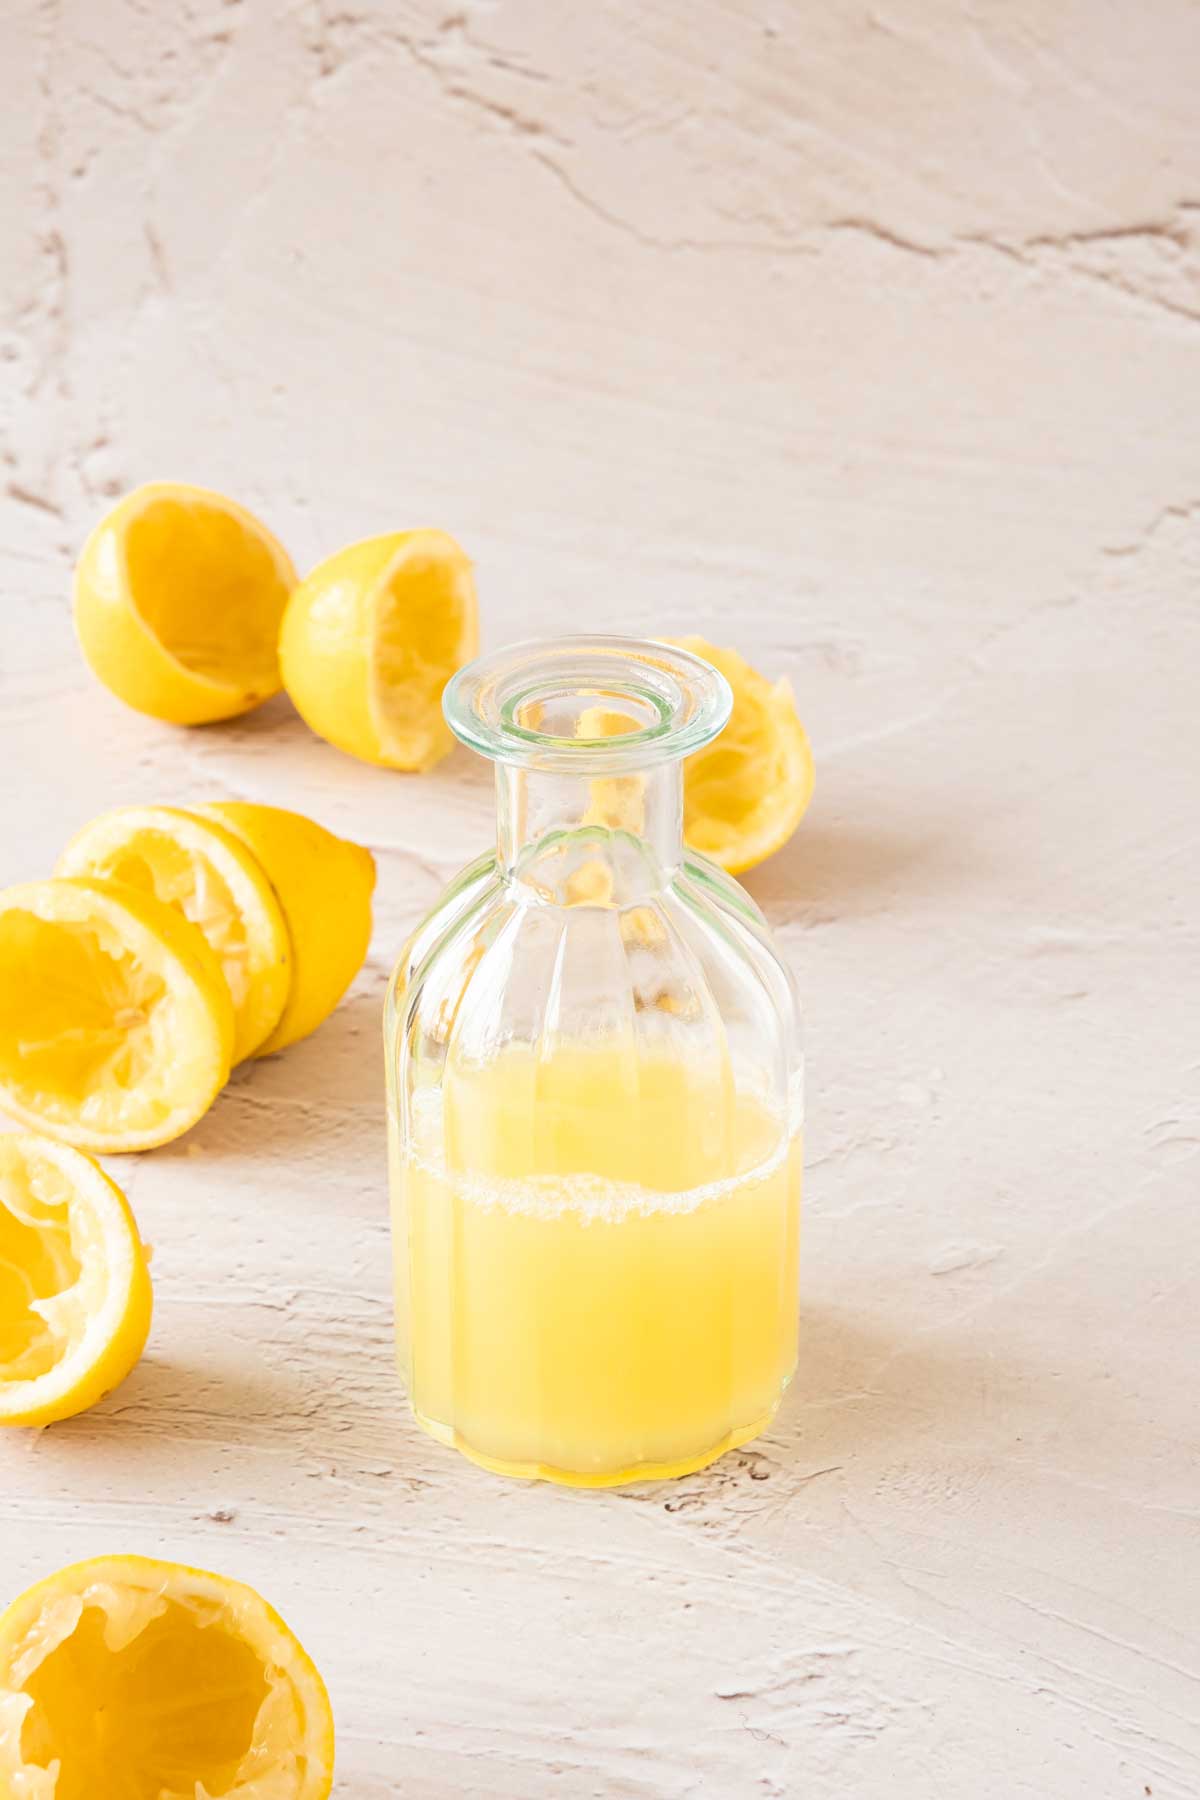 A bottle of lemon juice surrounded by squeezed lemons.